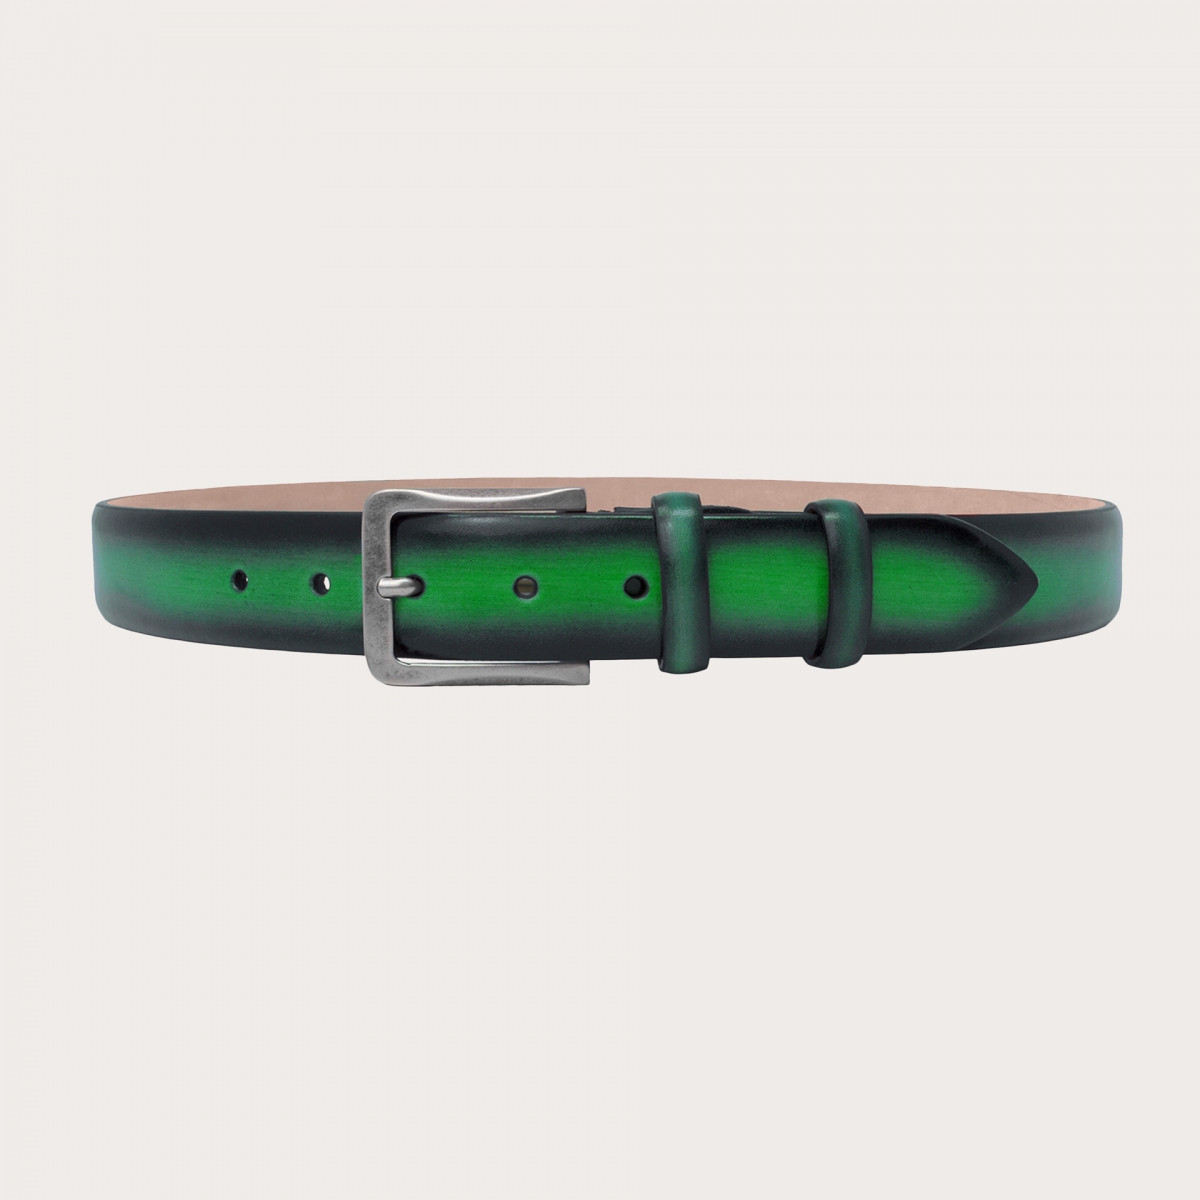 BRUCLE Original green belt in hand-buffered and hand-shaded leather